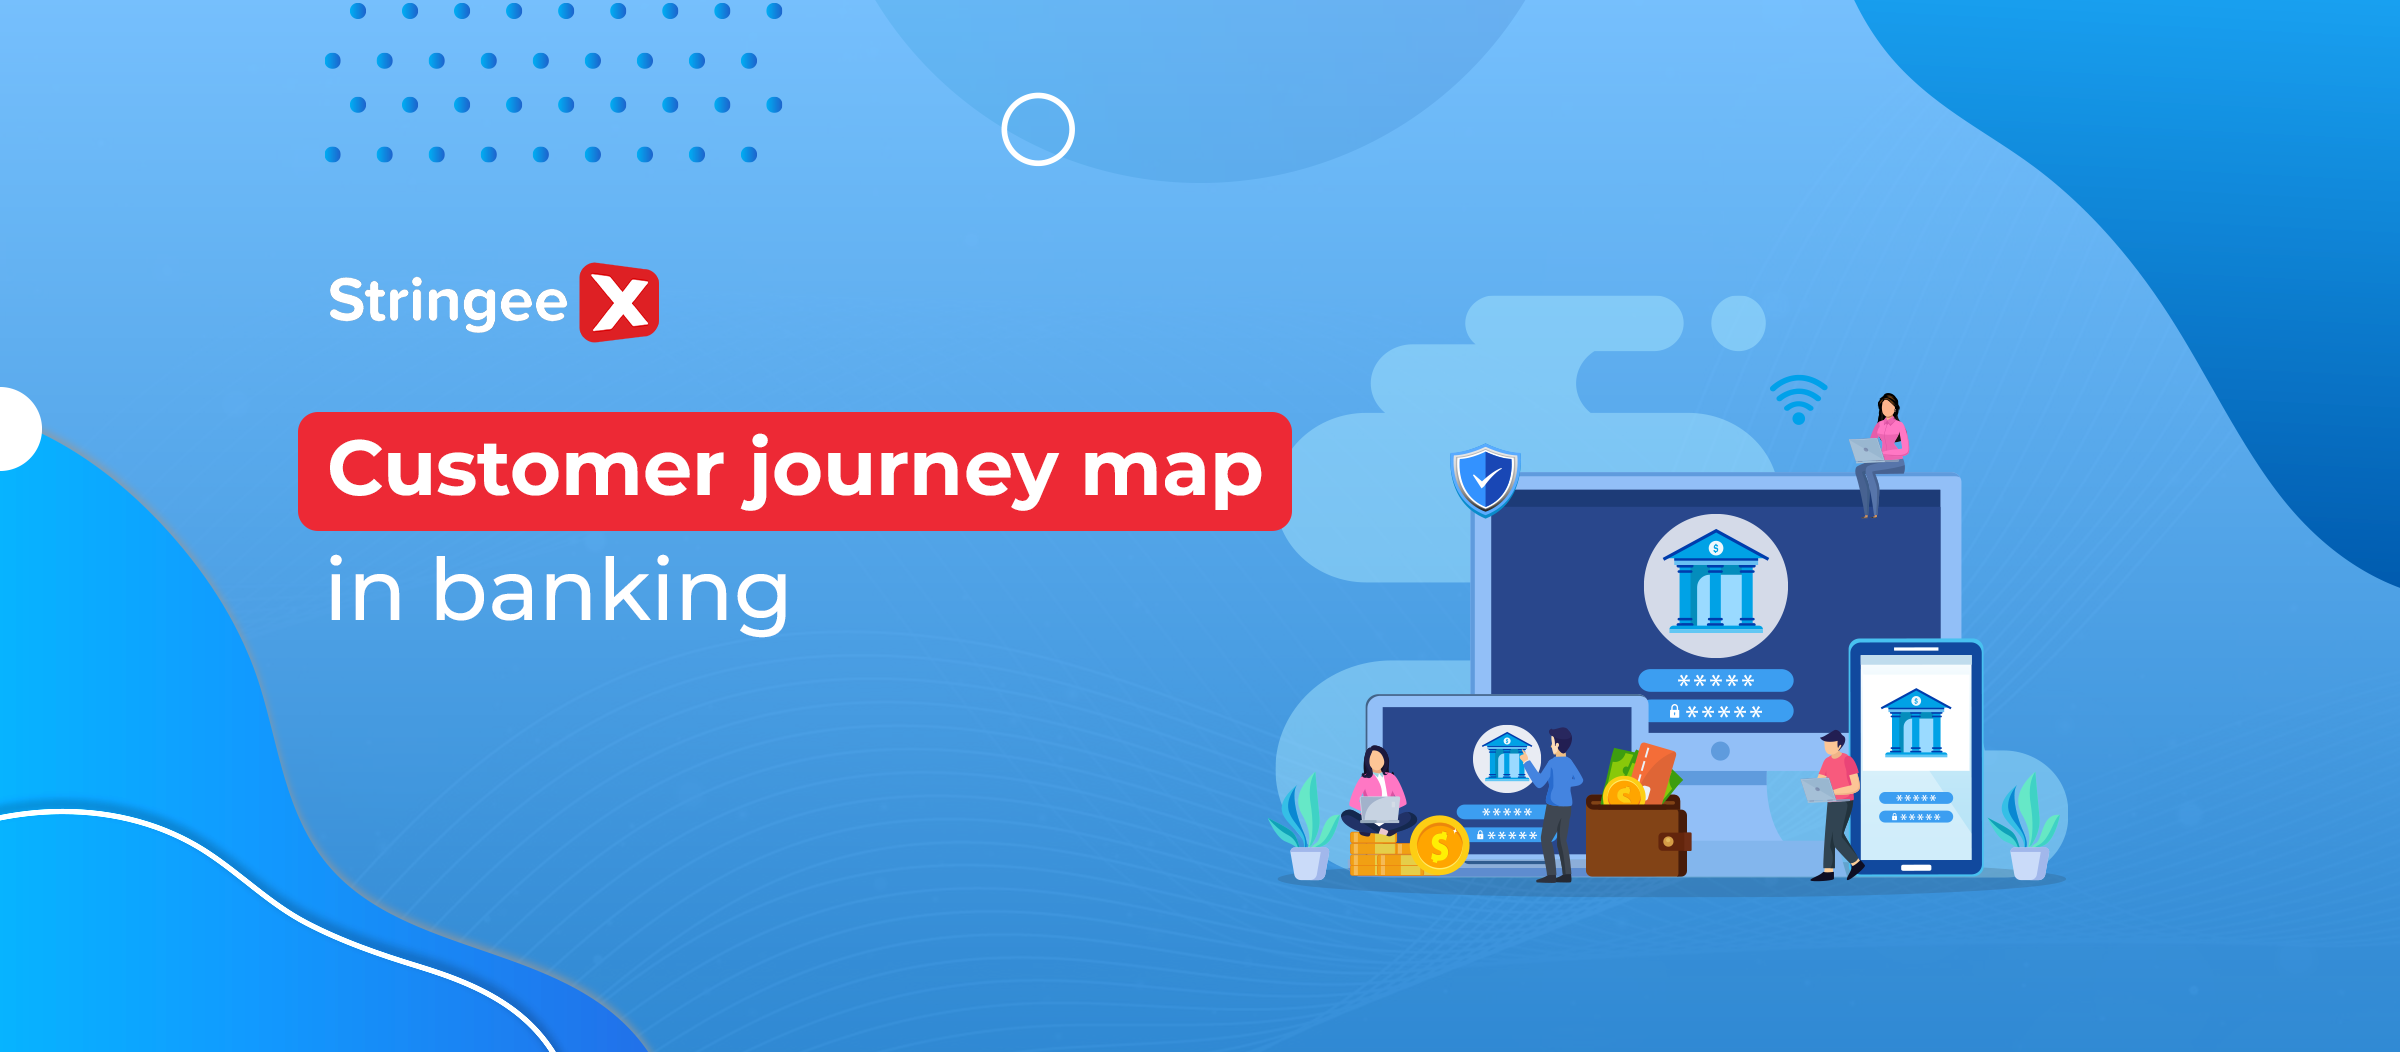 6 Steps Of The Customer Journey Map In Banking & Example